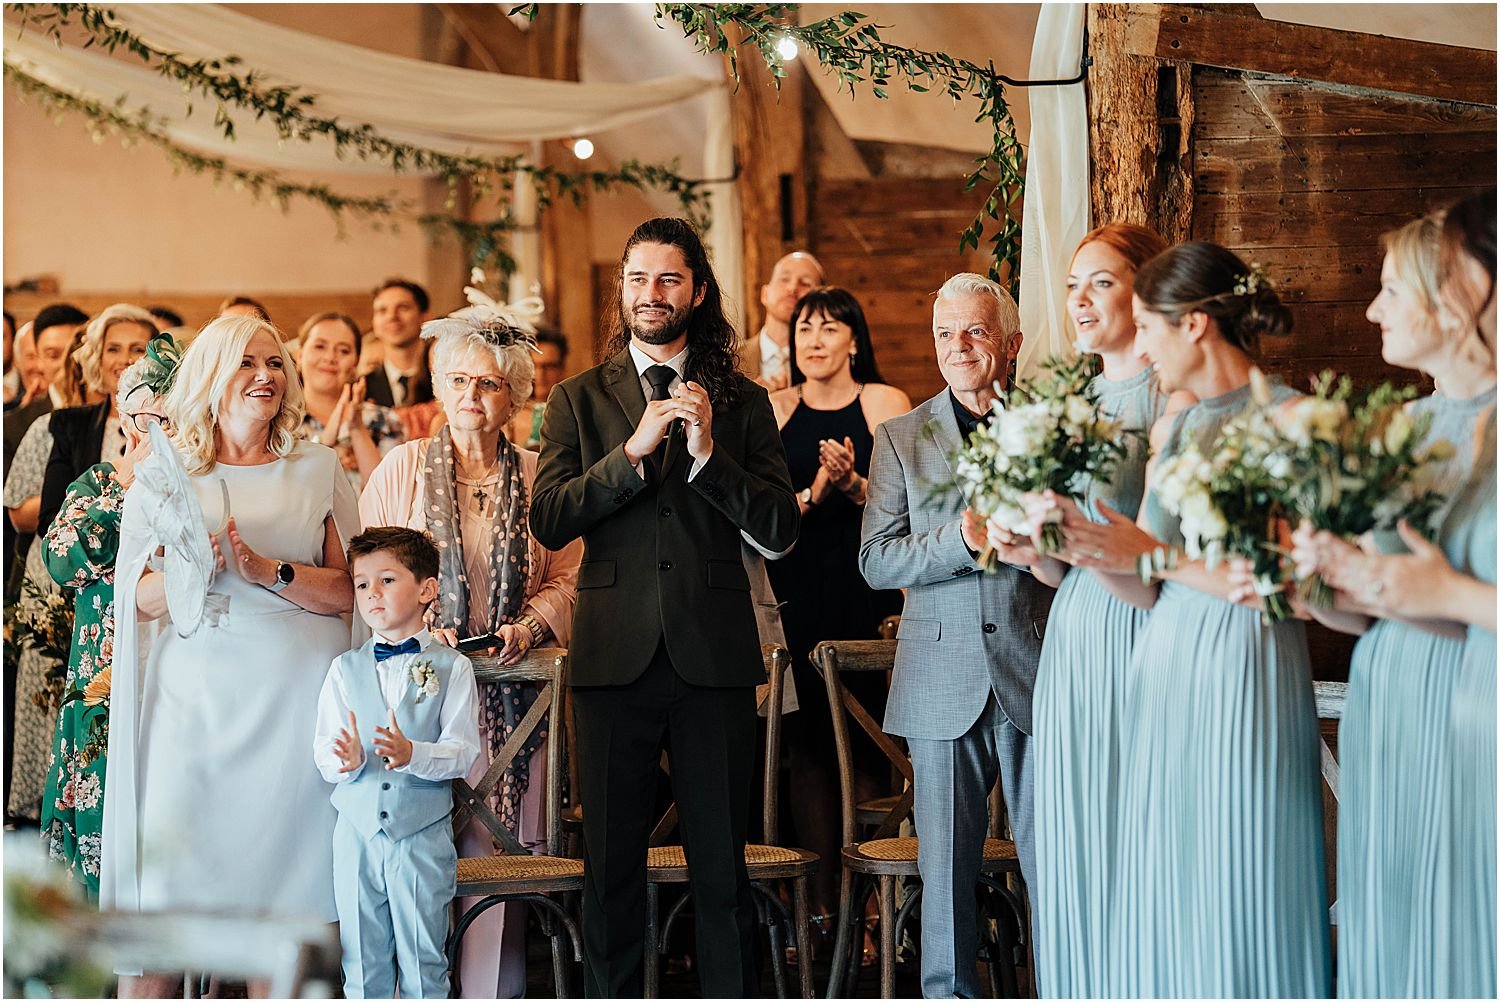 Guests clapping during wedding ceremony